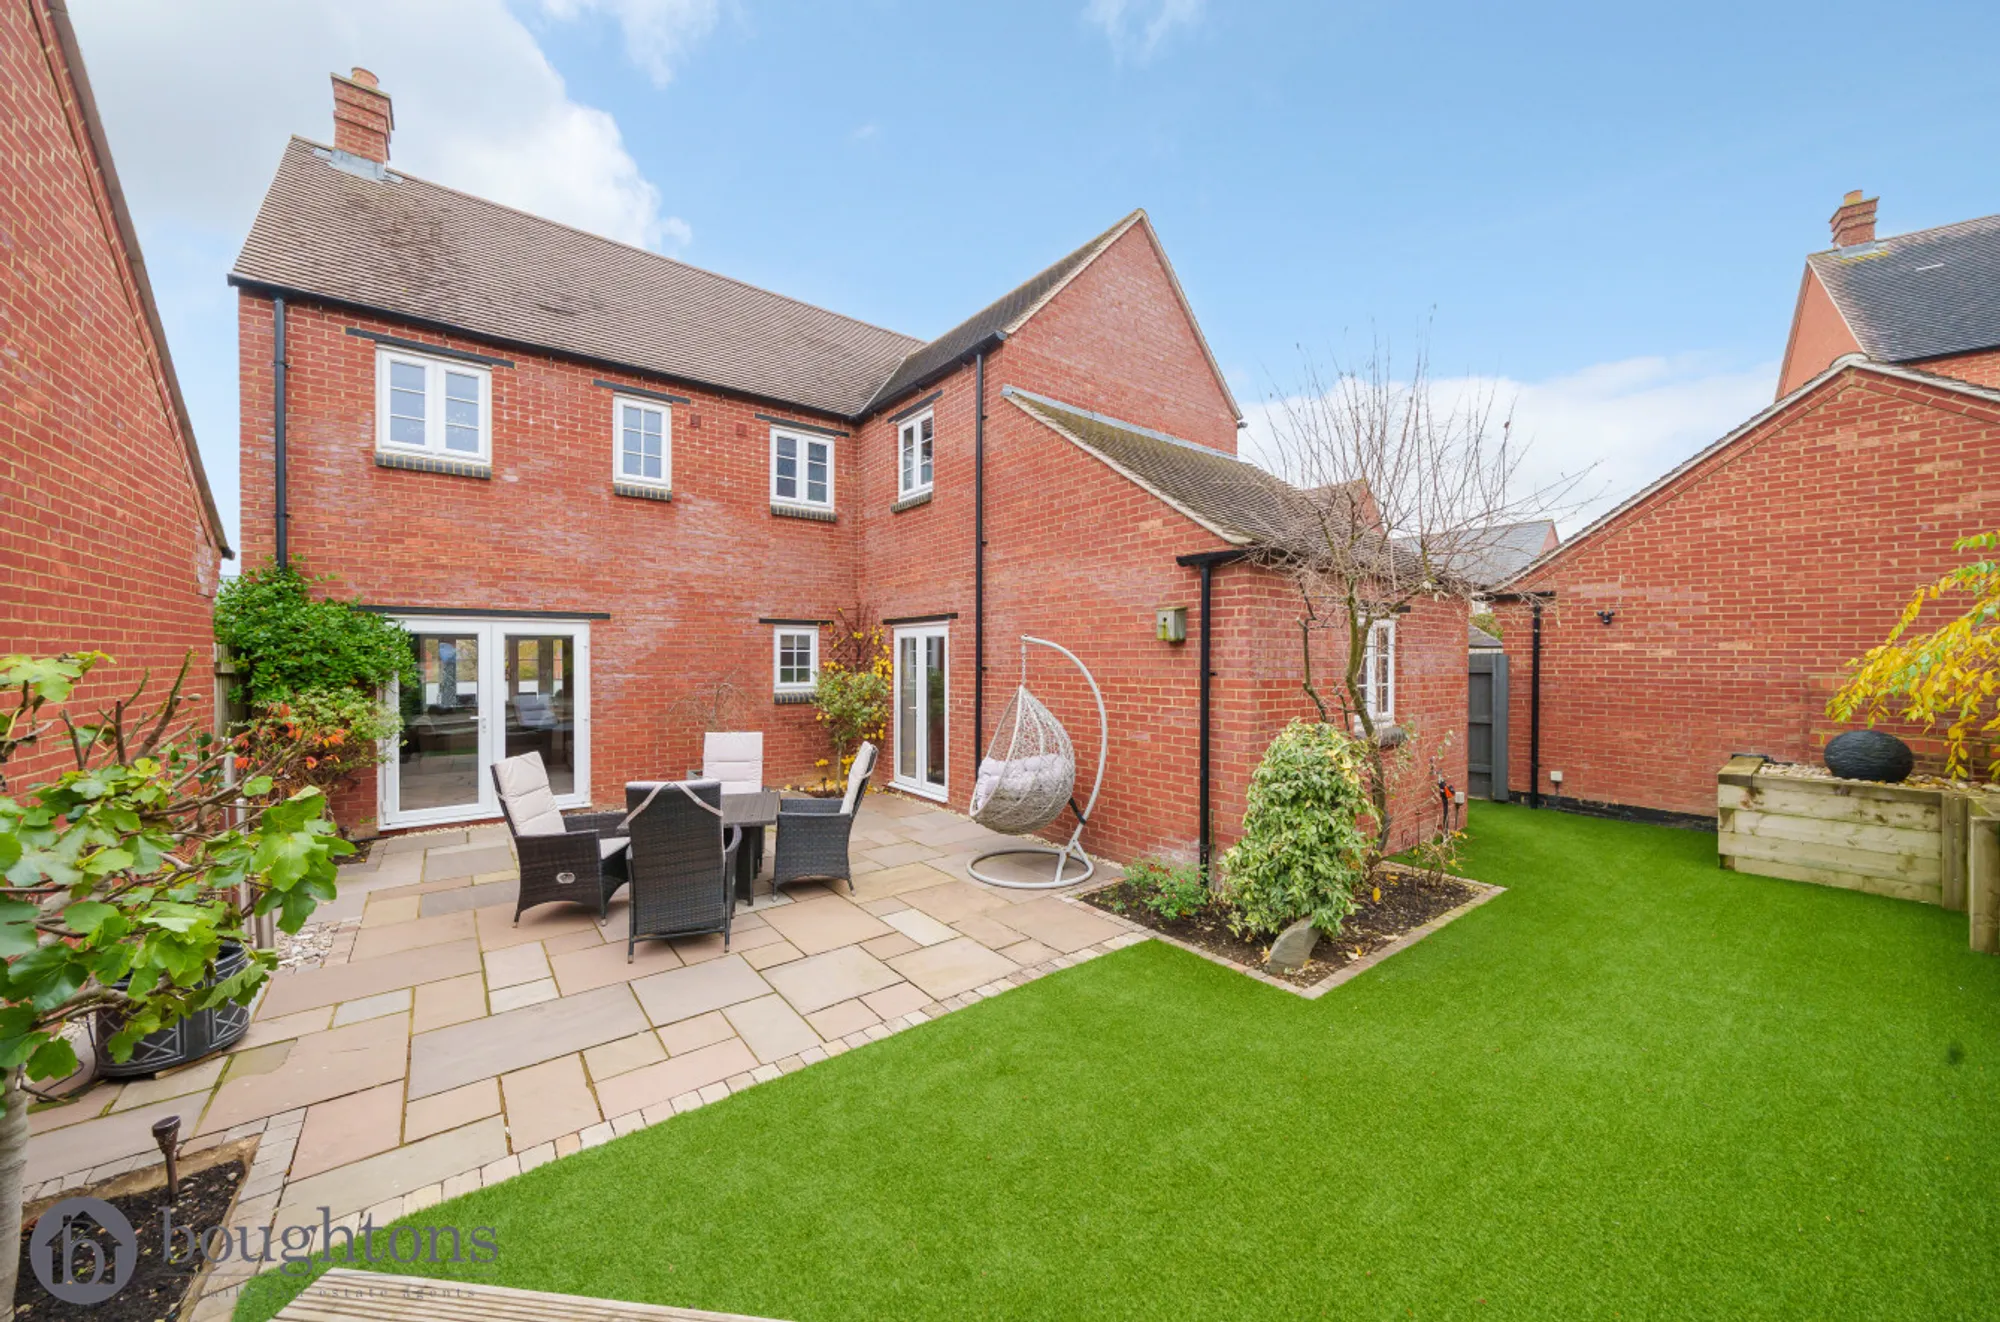 4 bed detached house for sale in Wolseley Close, Brackley - Property Image 1